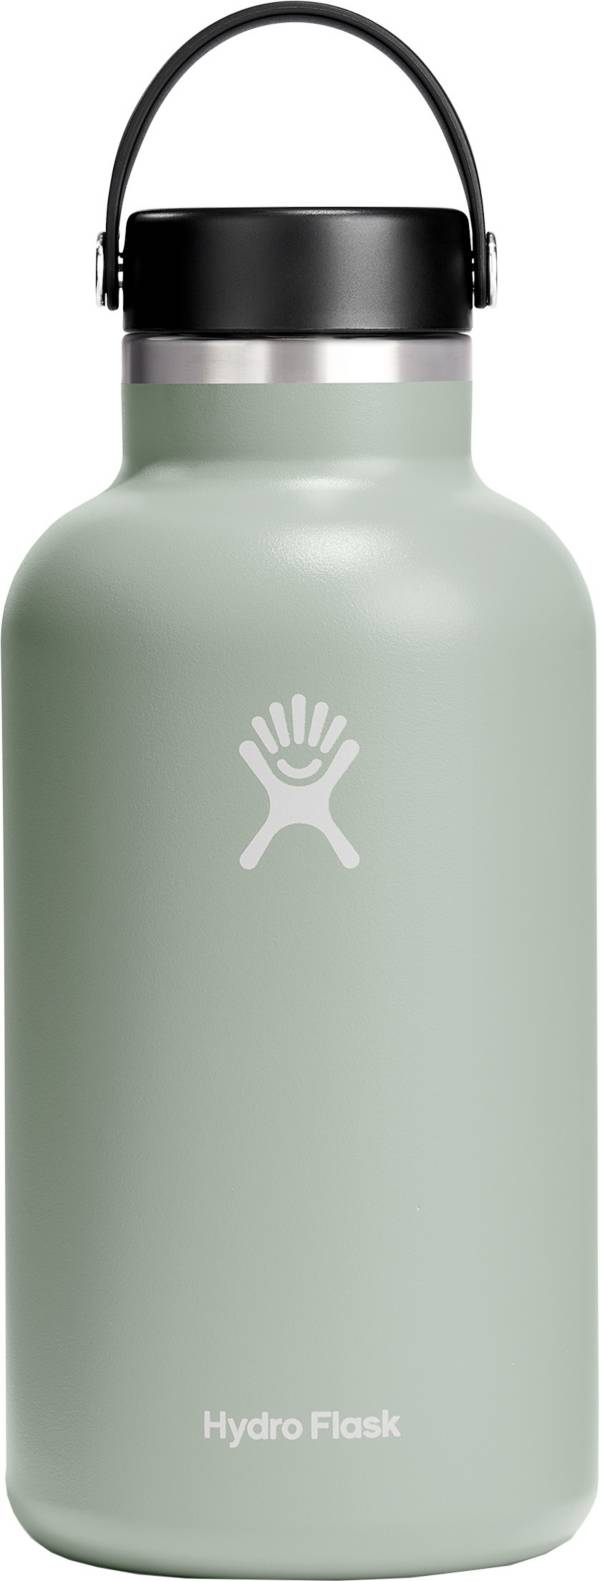 Hydro Flask Wide Mouth 64 oz. Bottle - New Style